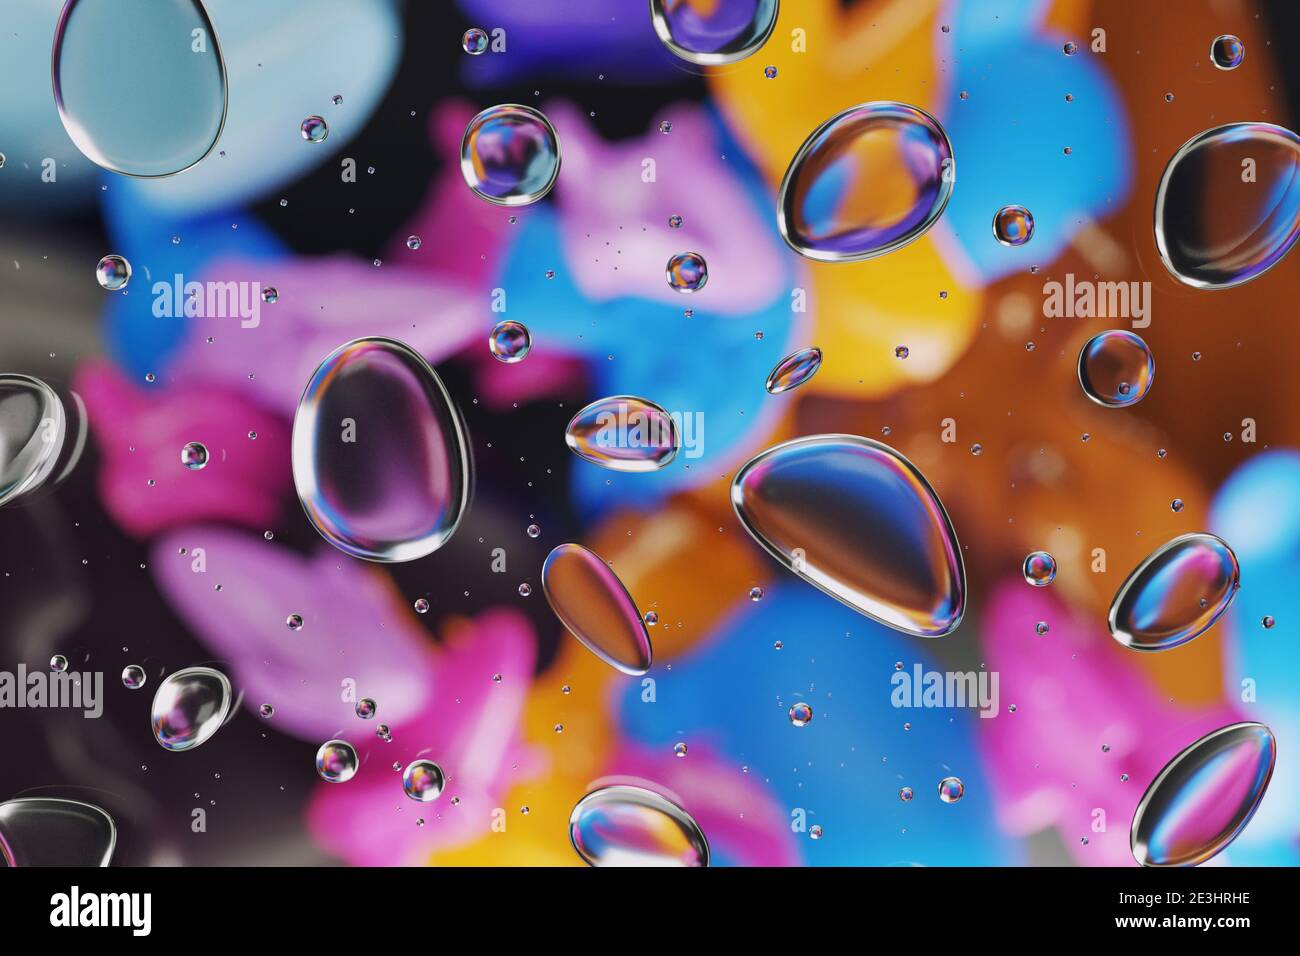 3D Illustration of group of drops on glass with colorful and blurred background. High quality 3d illustration Stock Photo